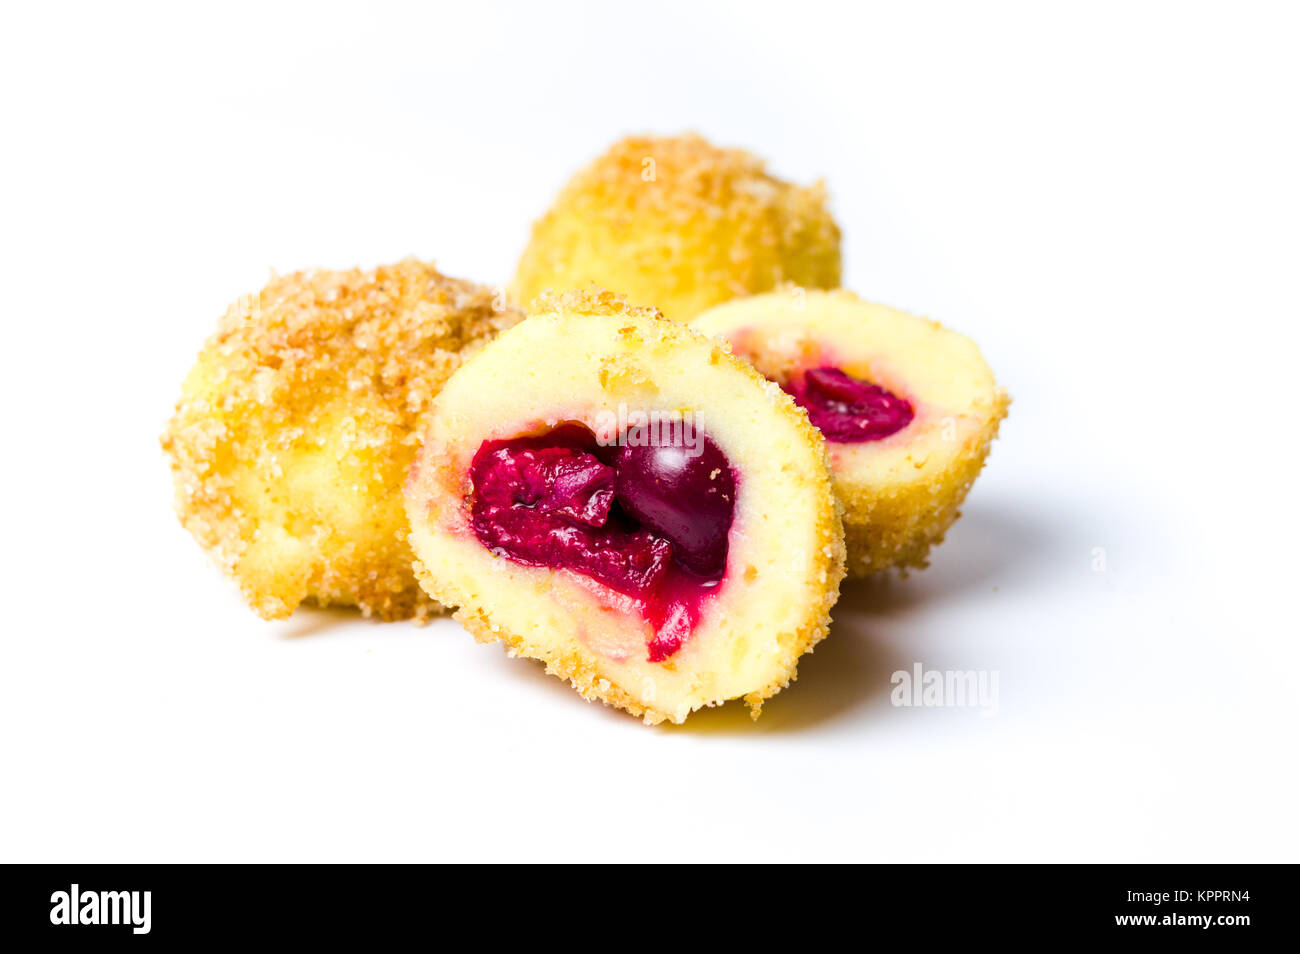 Homemade bread crumb dumplings with cherry fruit isolated Stock Photo